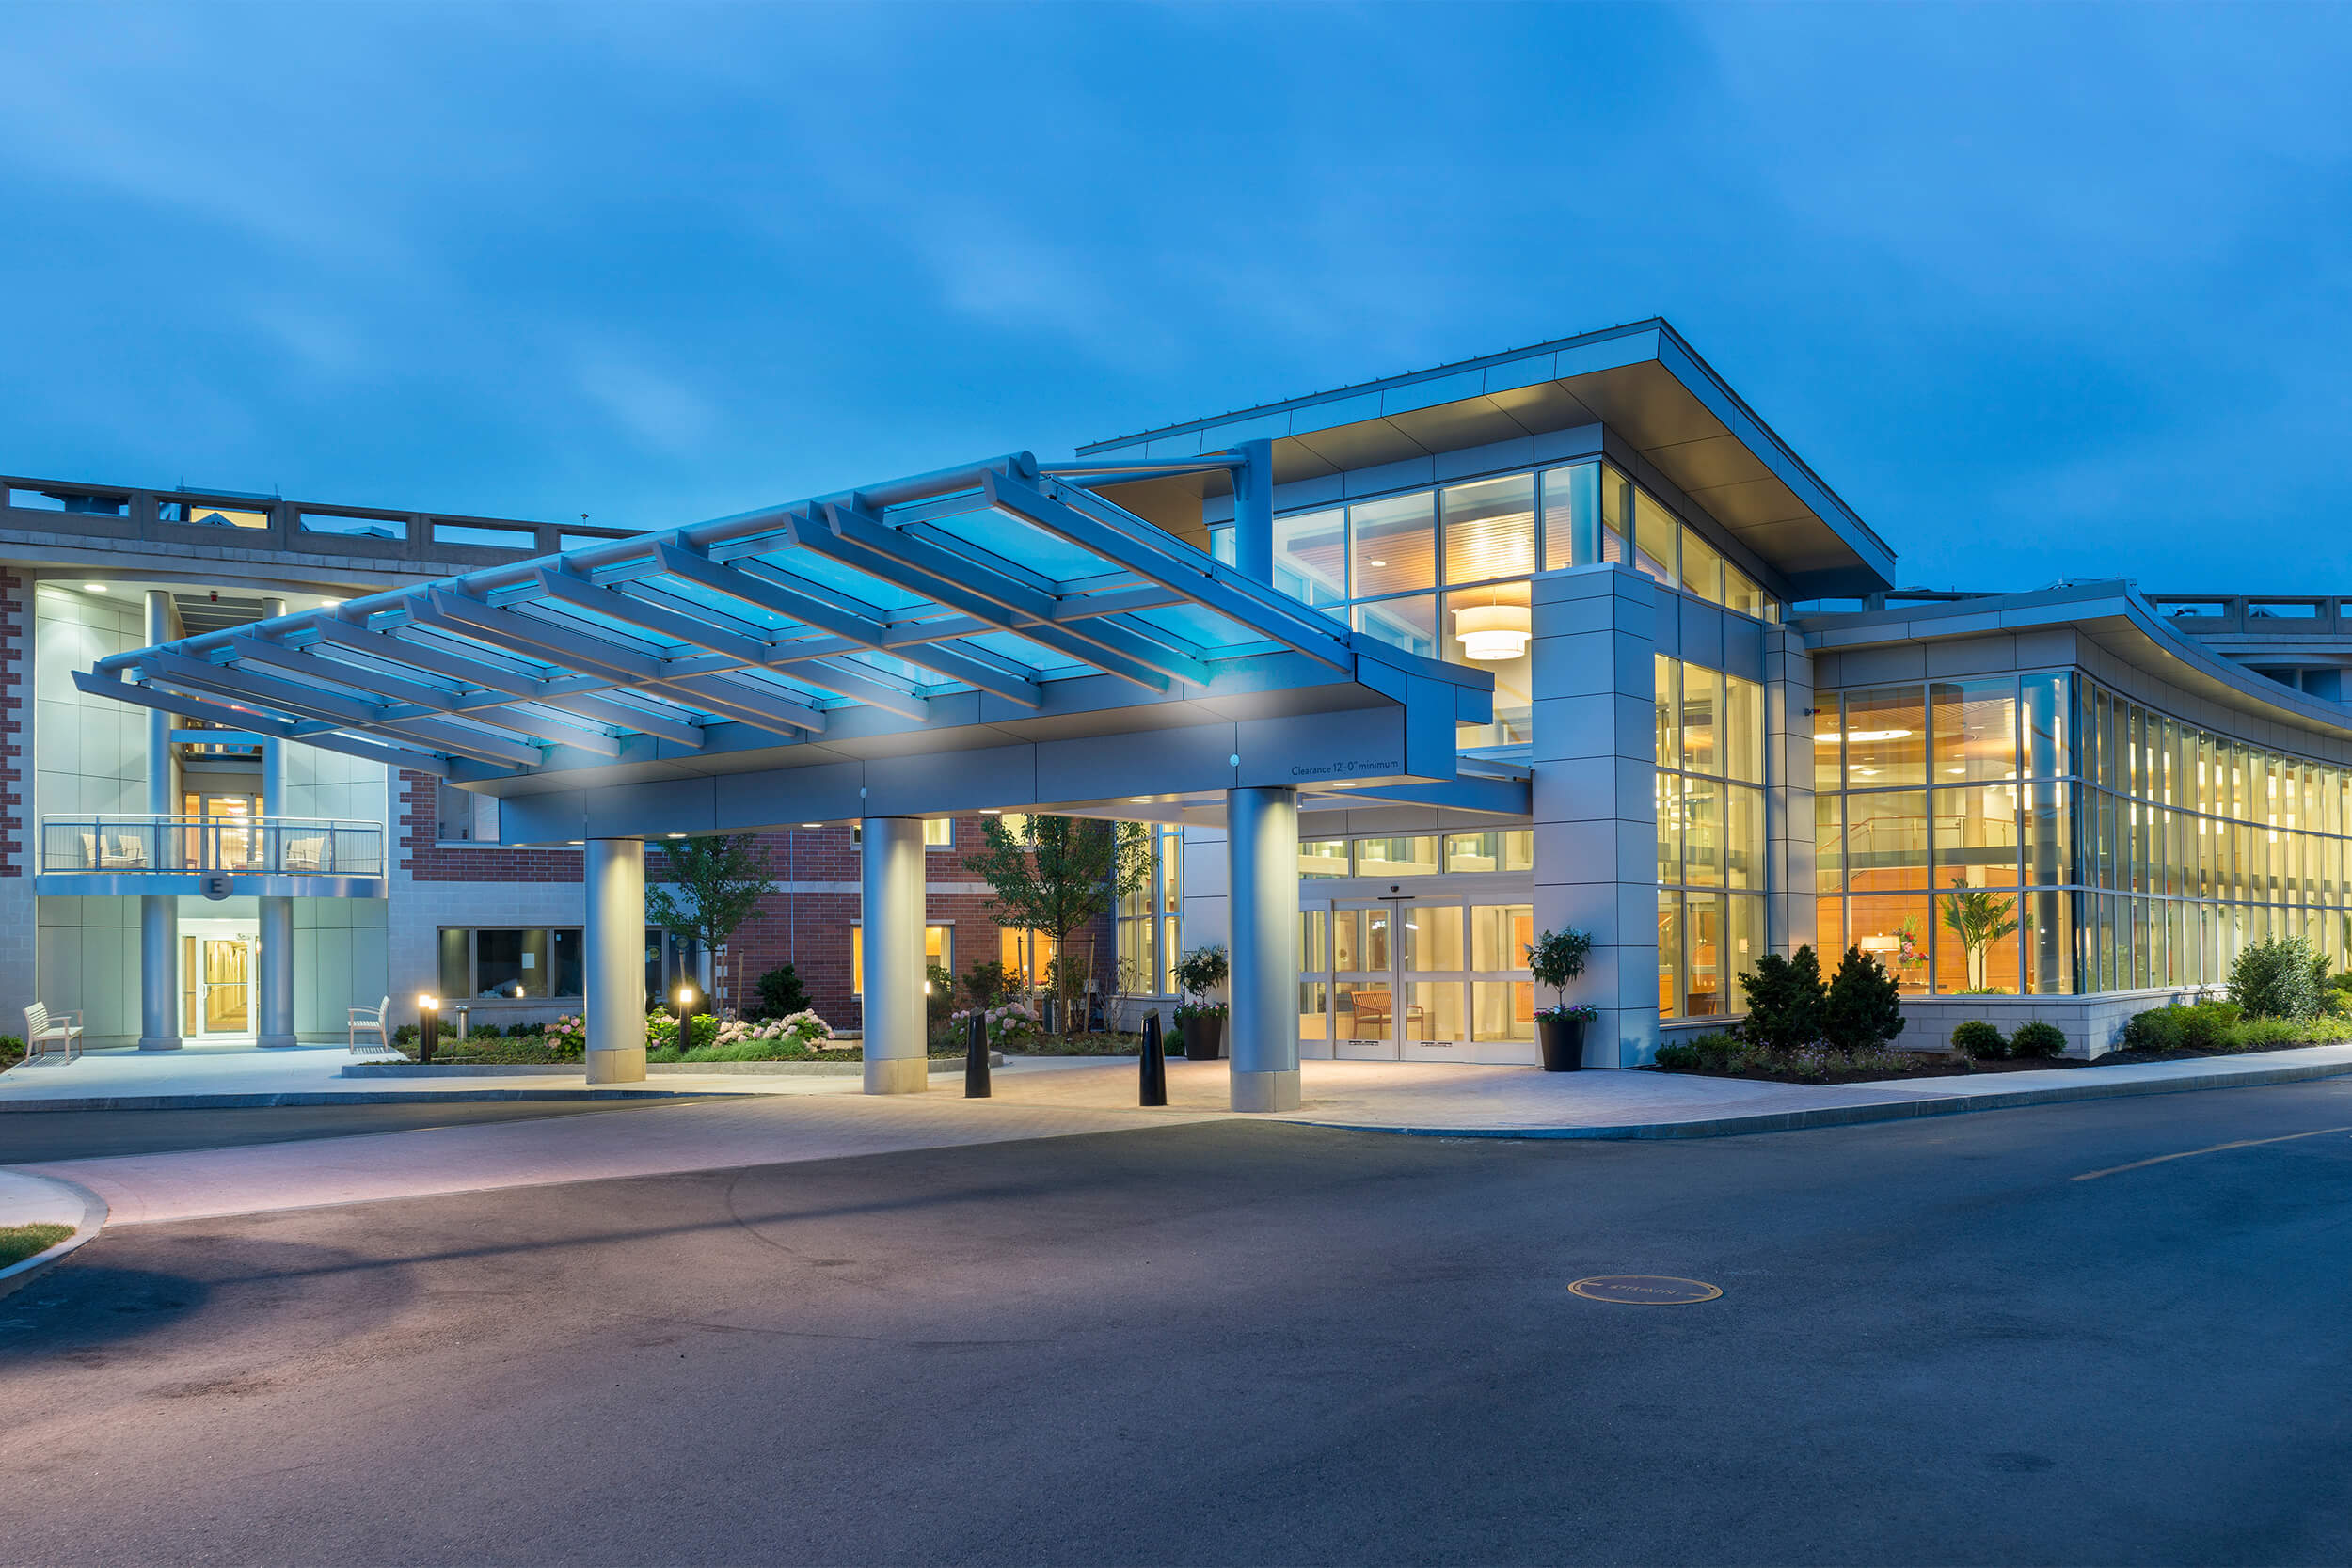 Exterior view of the entry of a senior living facility building. The photo is taken at dusk, with lighting inside the building illuminating it. The entryway features large floor-to-ceiling glass walls/windows.